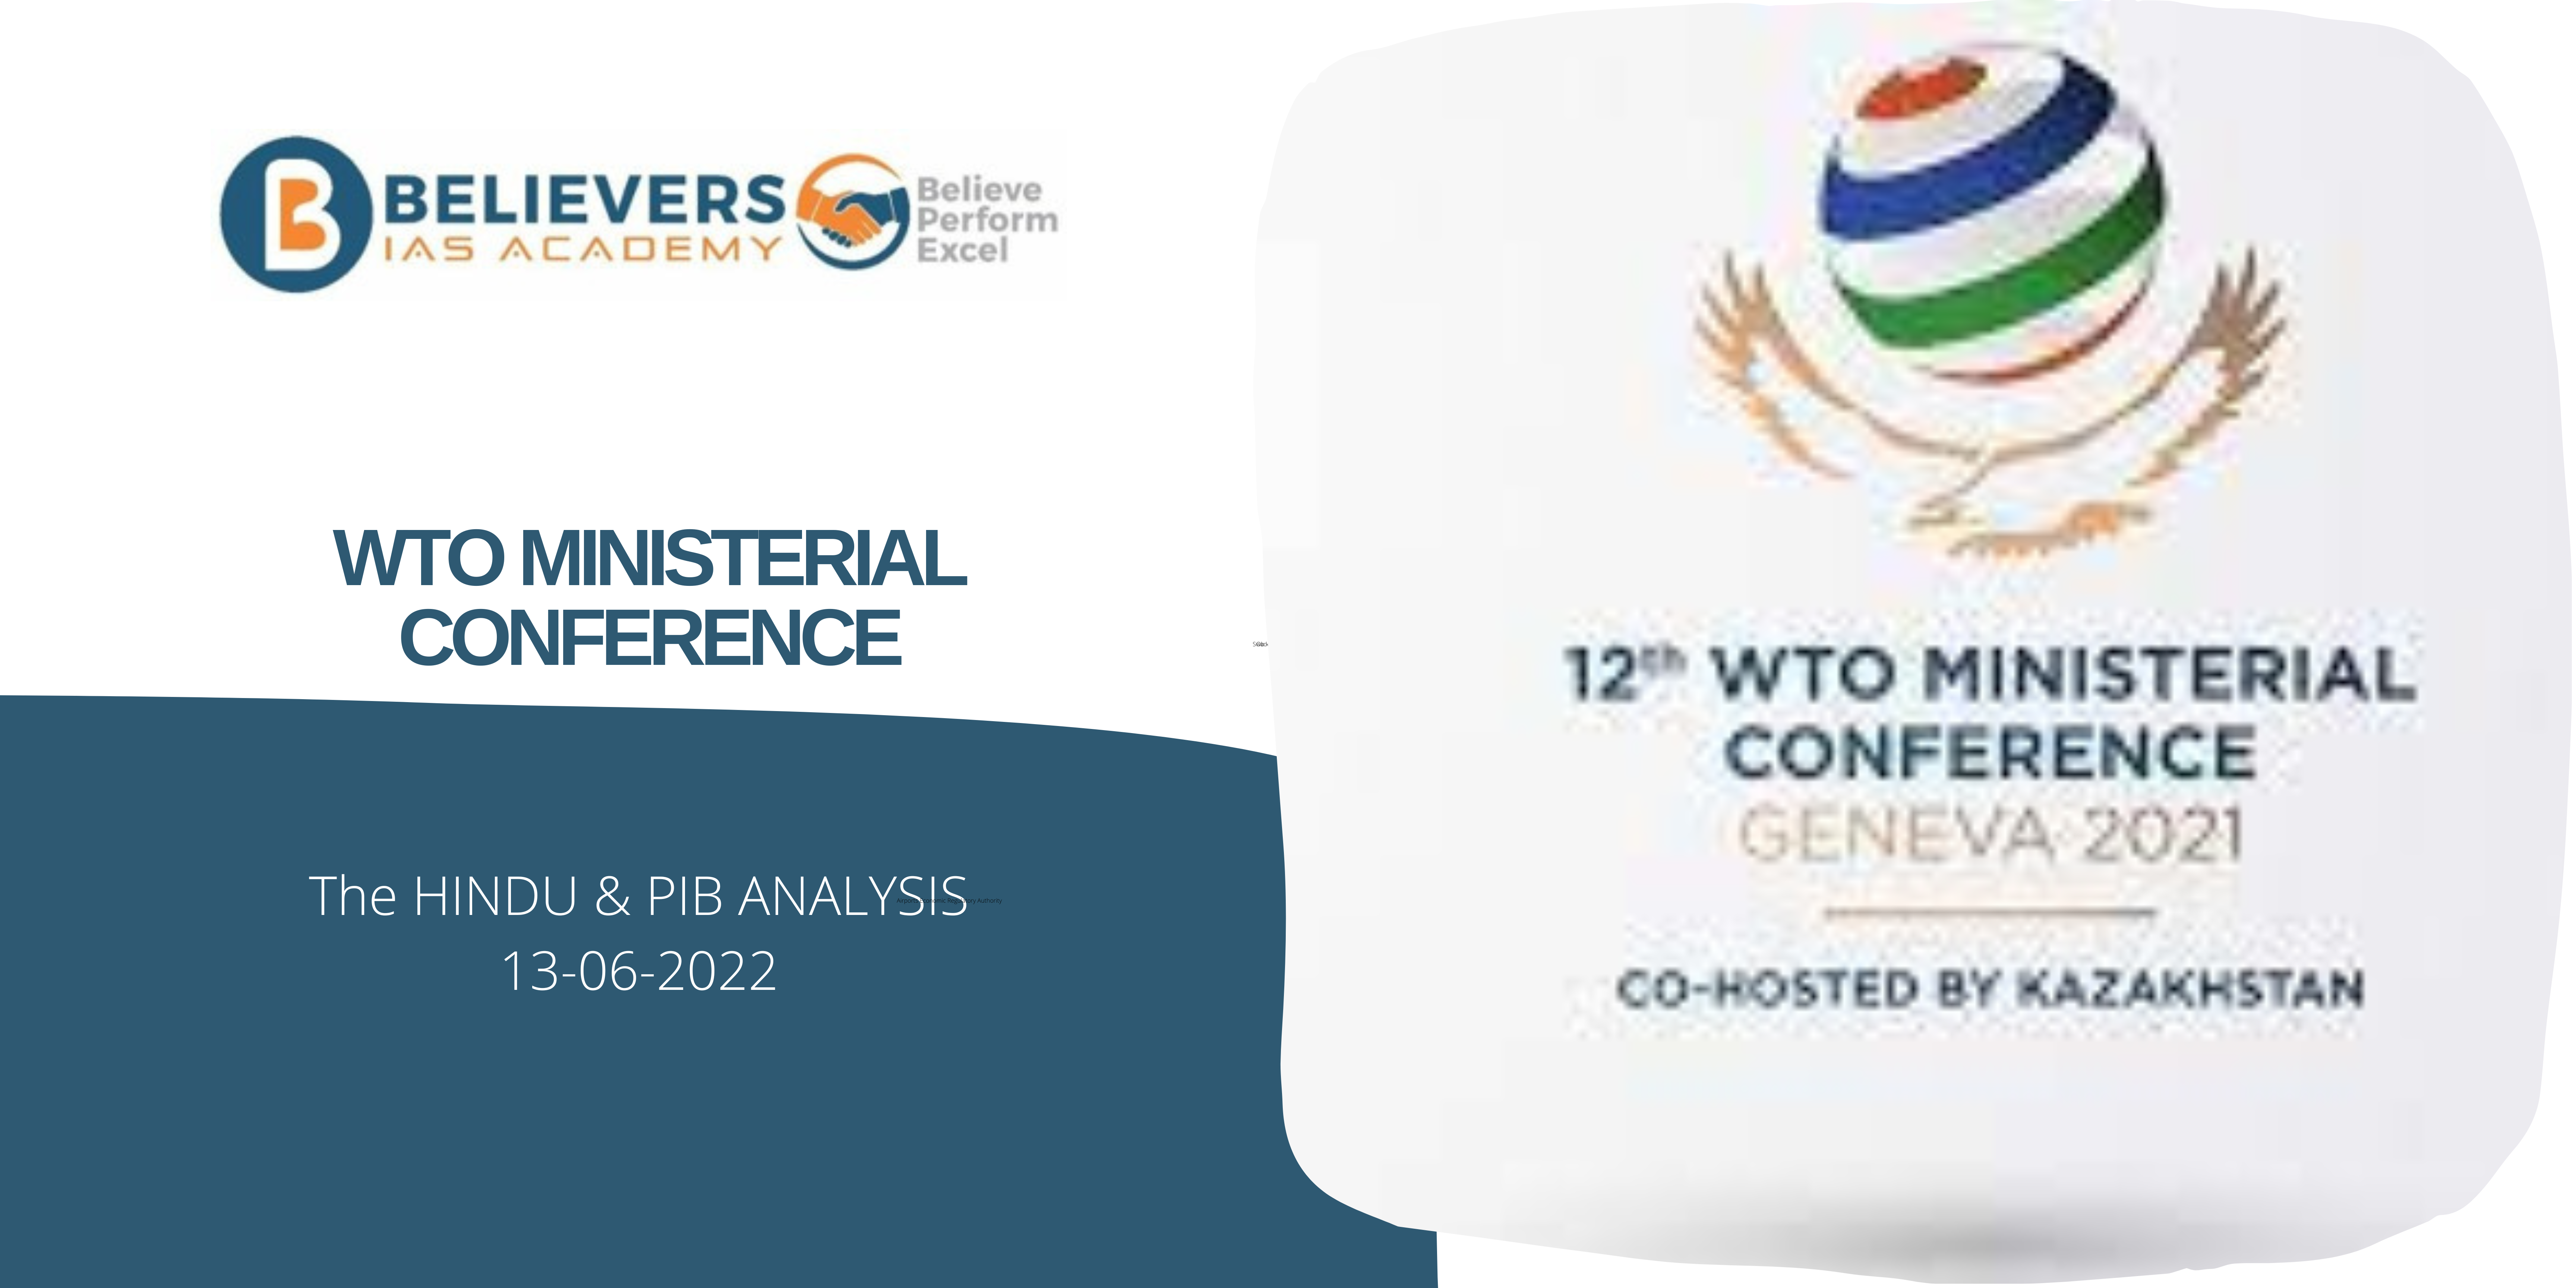 Civil services Current affairs - WTO Ministerial Conference